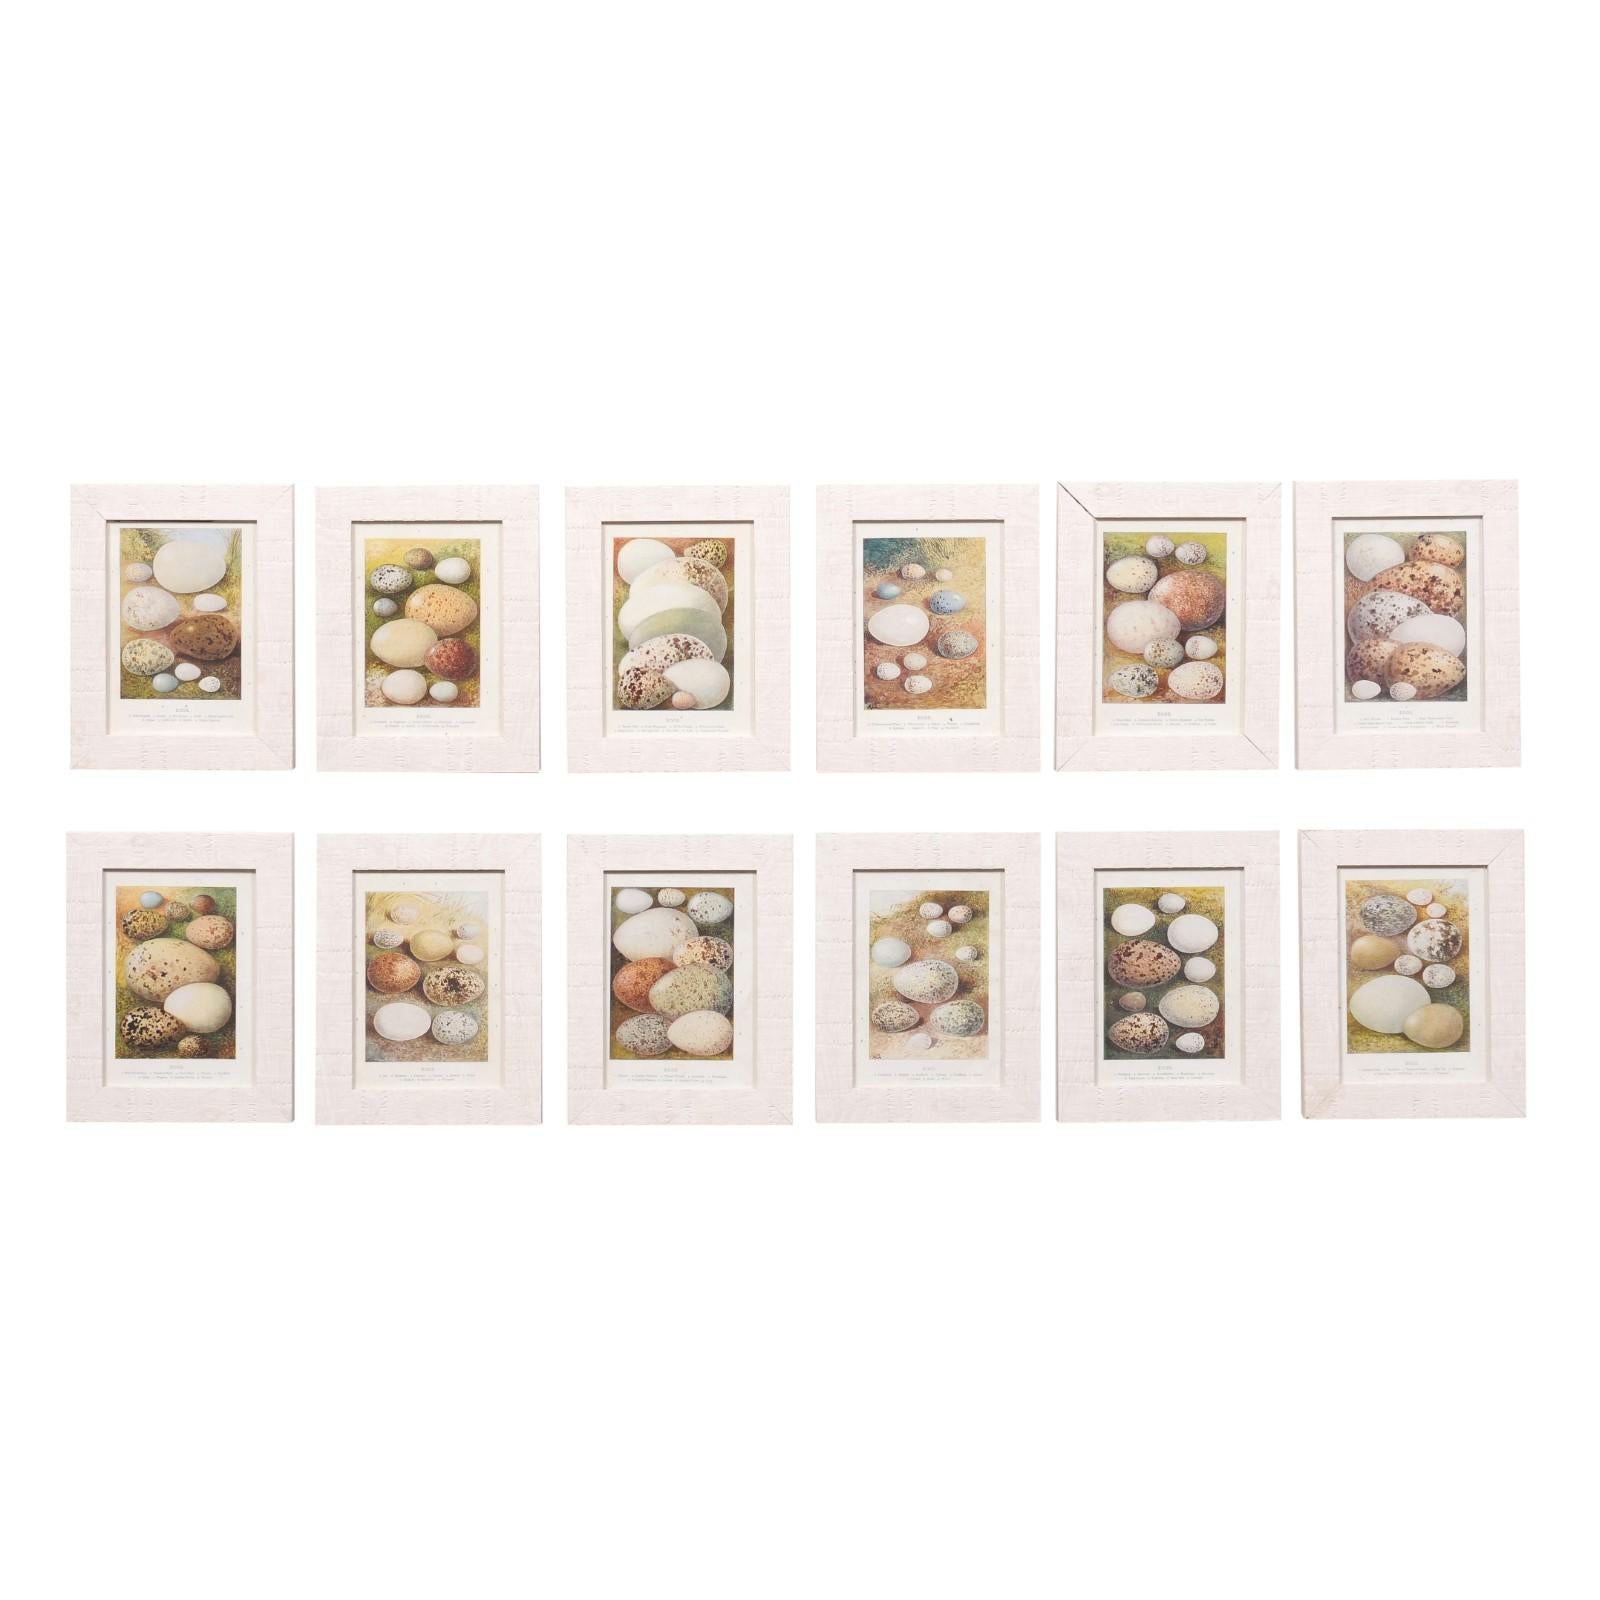 English egg prints from the 20th century in custom wooden frames and under glass. We have 12 pieces available, priced and sold each. Embark on a journey of ornithological discovery with these captivating English egg prints from the 20th century.